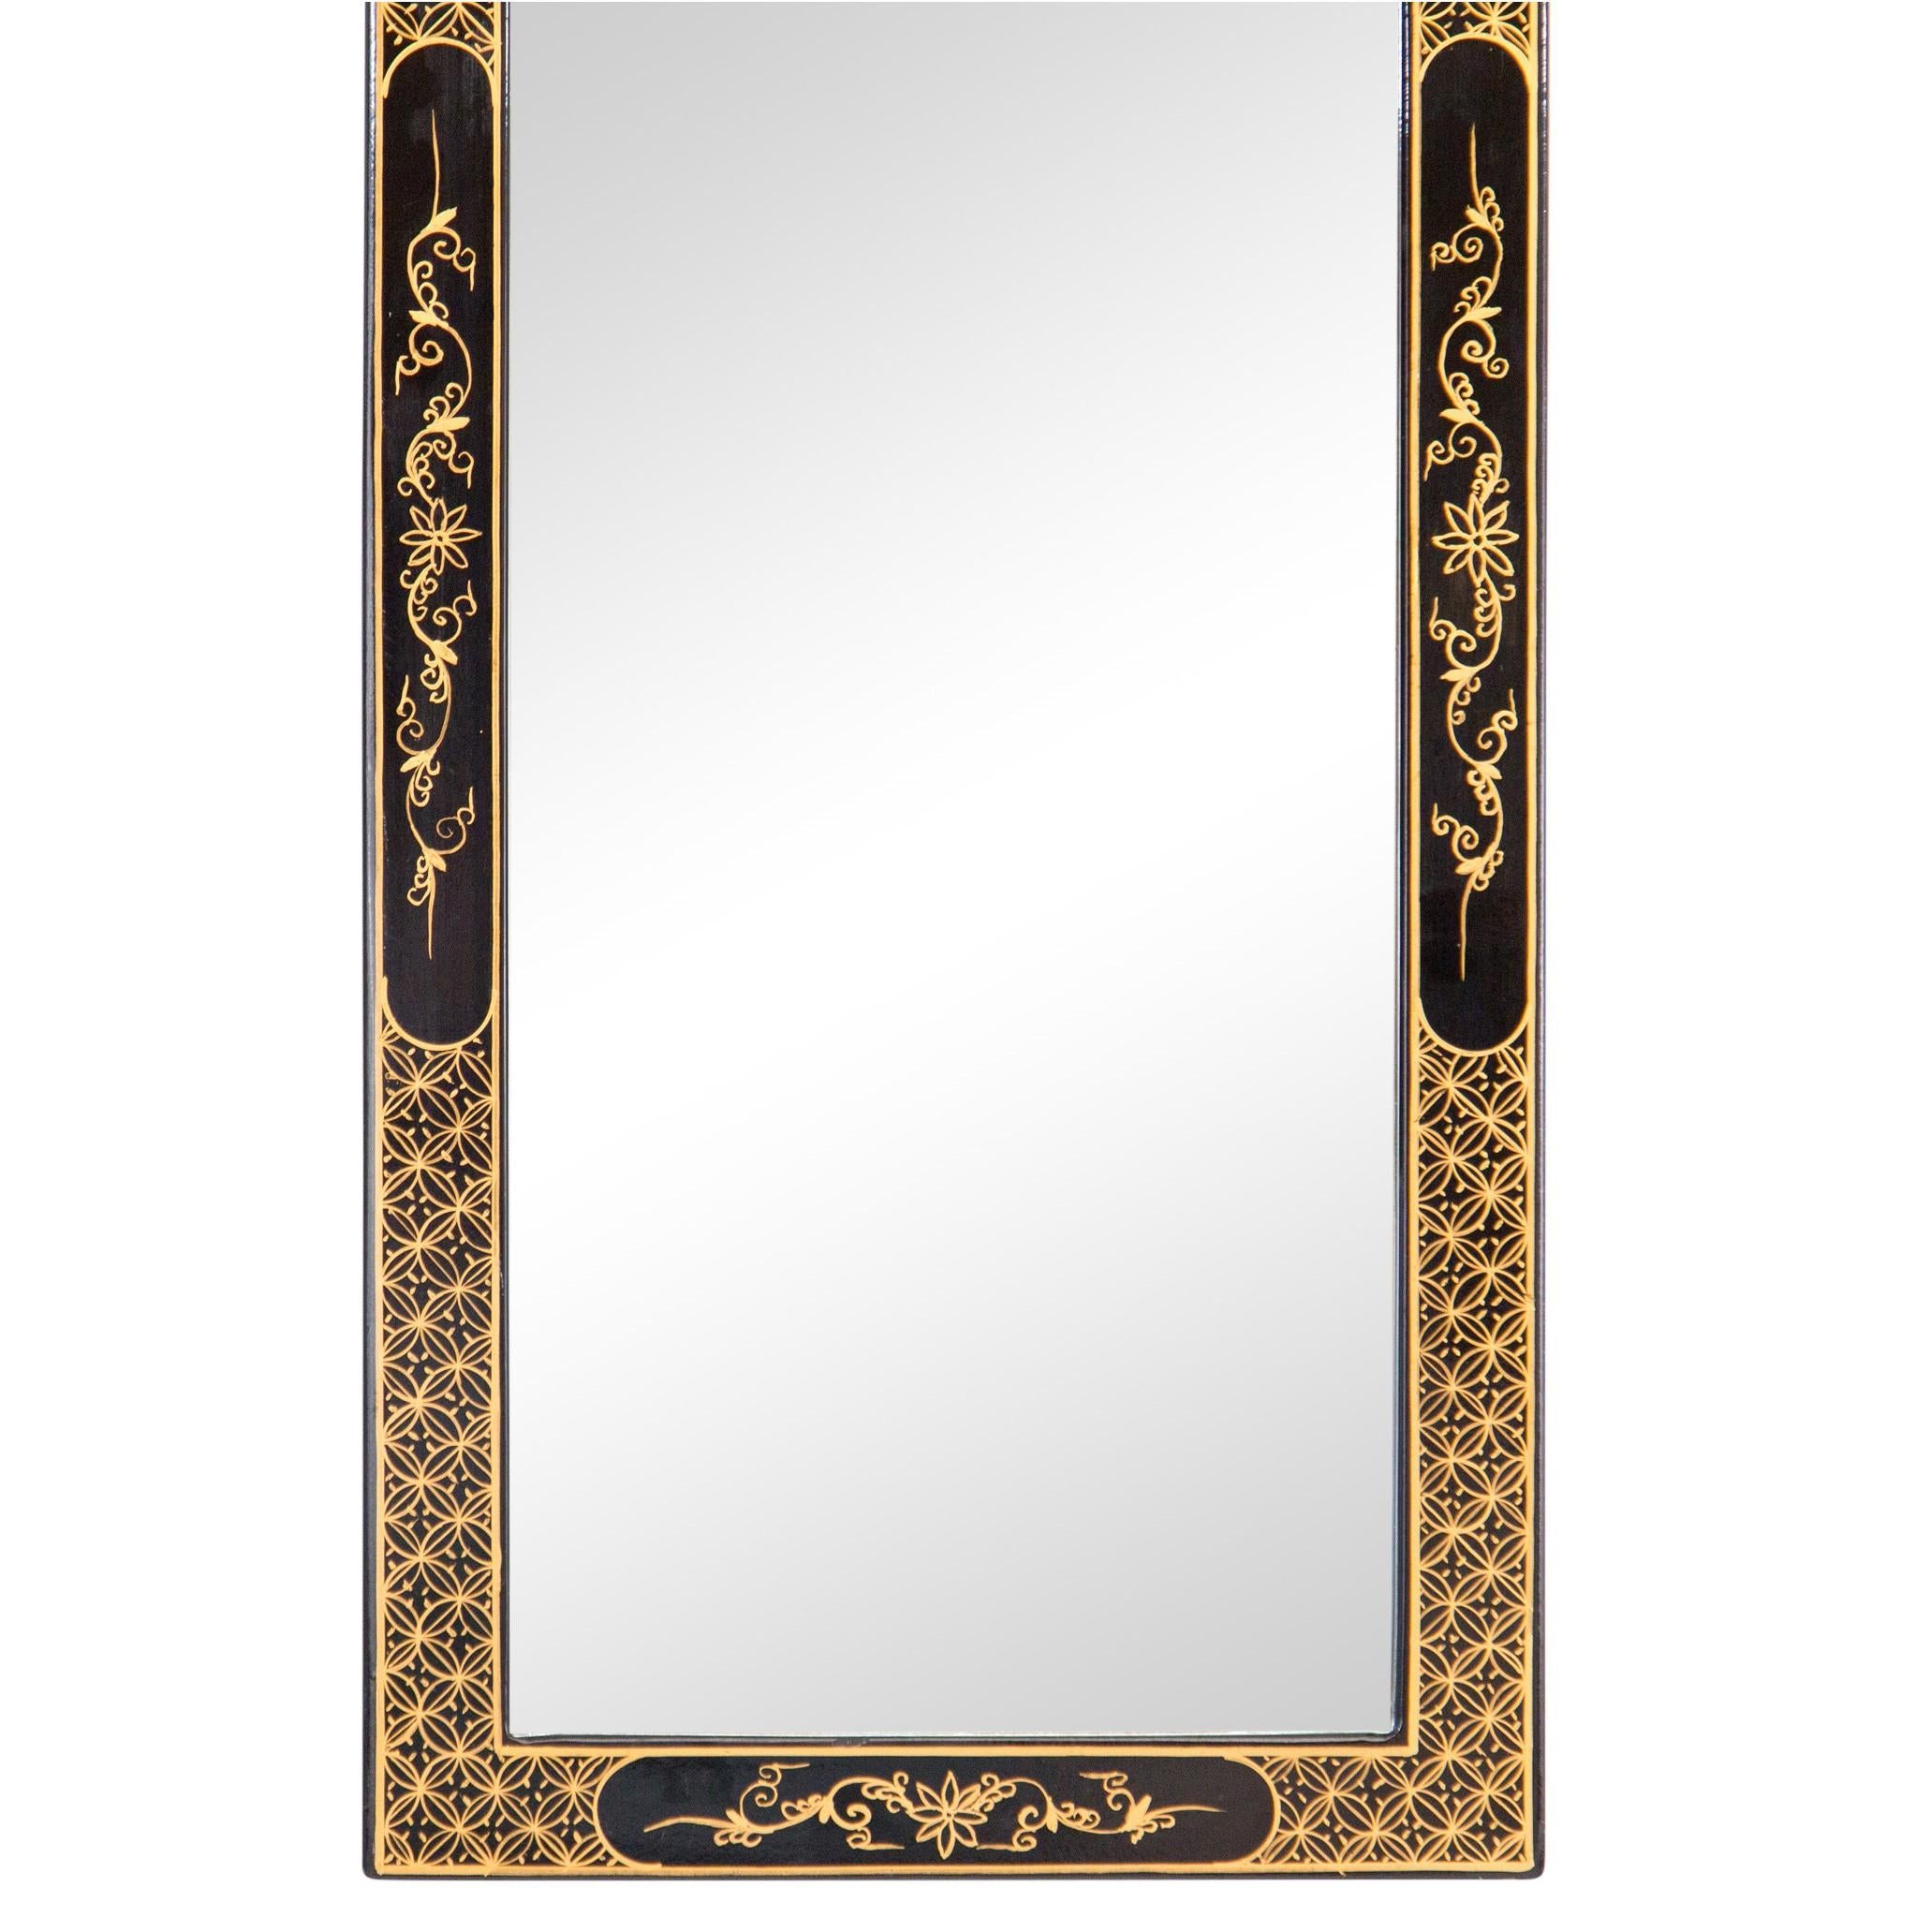 20th Century Vintage Chinoiserie Black and Gold Lacquered Floral Motif Trumeau Mirror